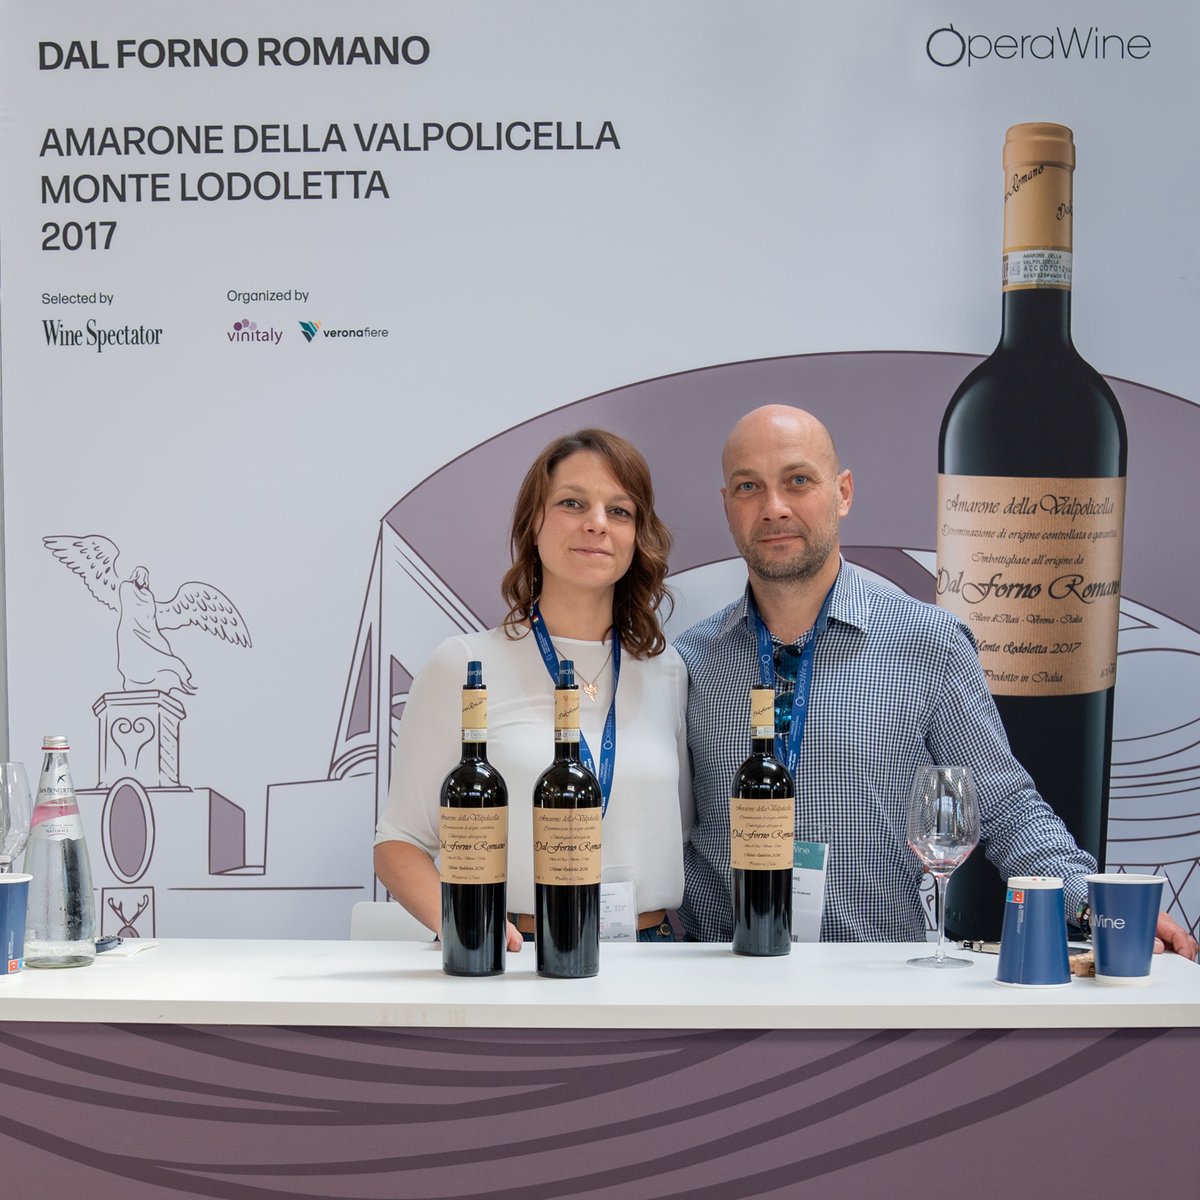 Here is the portrait of Dal Forno Romano, one of the great Italian producers selected by Wine Spectator for #OperaWine2024. During this year's Grand Tasting, they shared with guests their Amarone della Valpolicella Monte Lodoletta 2017. Congratulations! #Vinitaly2024